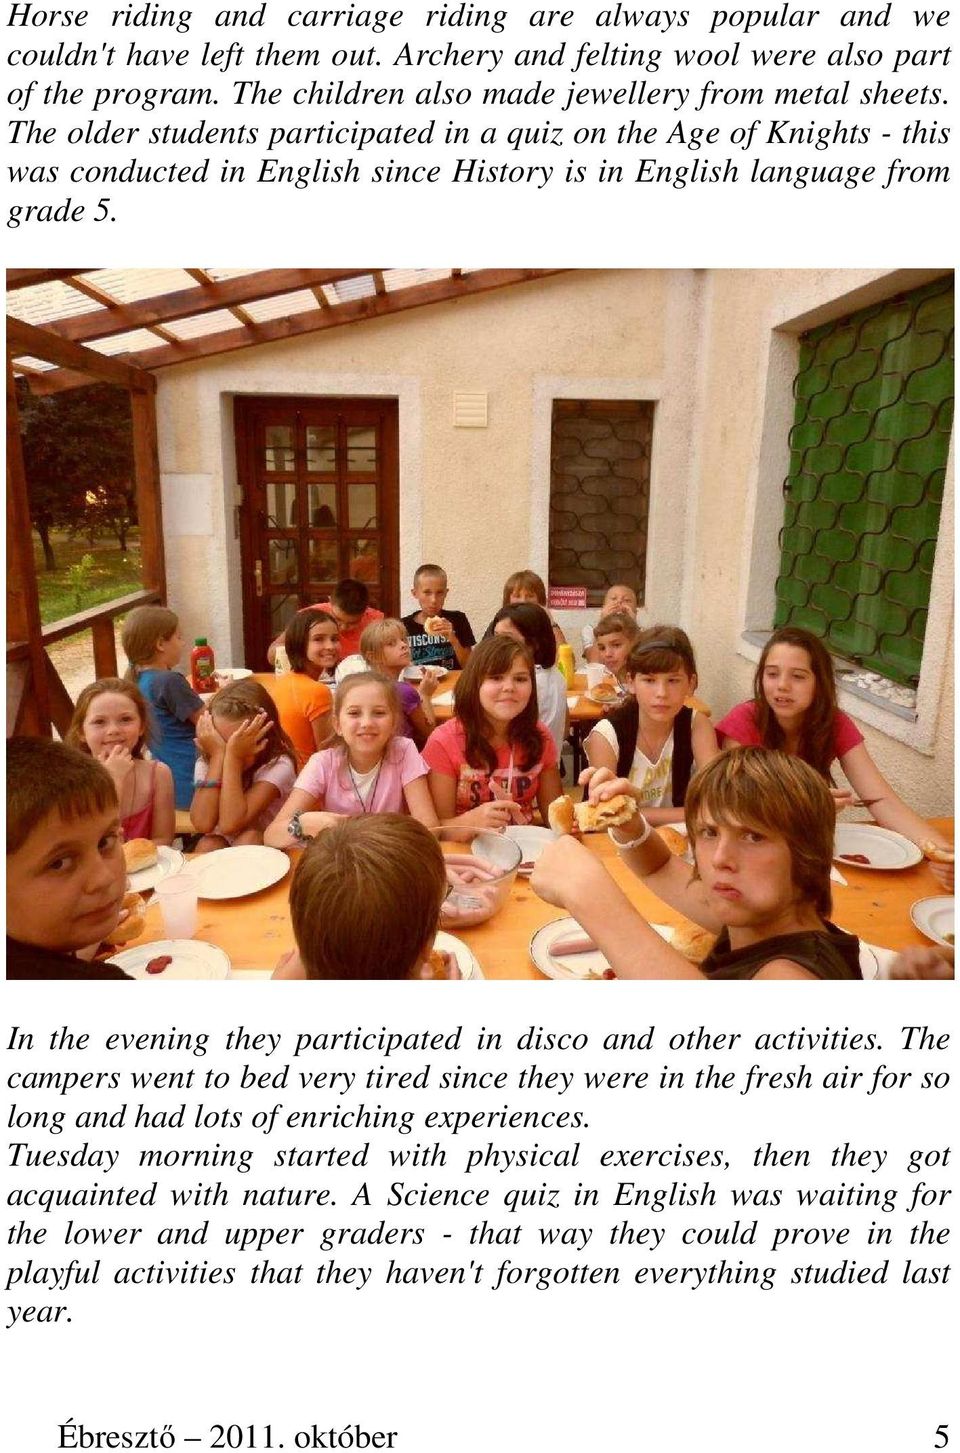 In the evening they participated in disco and other activities. The campers went to bed very tired since they were in the fresh air for so long and had lots of enriching experiences.